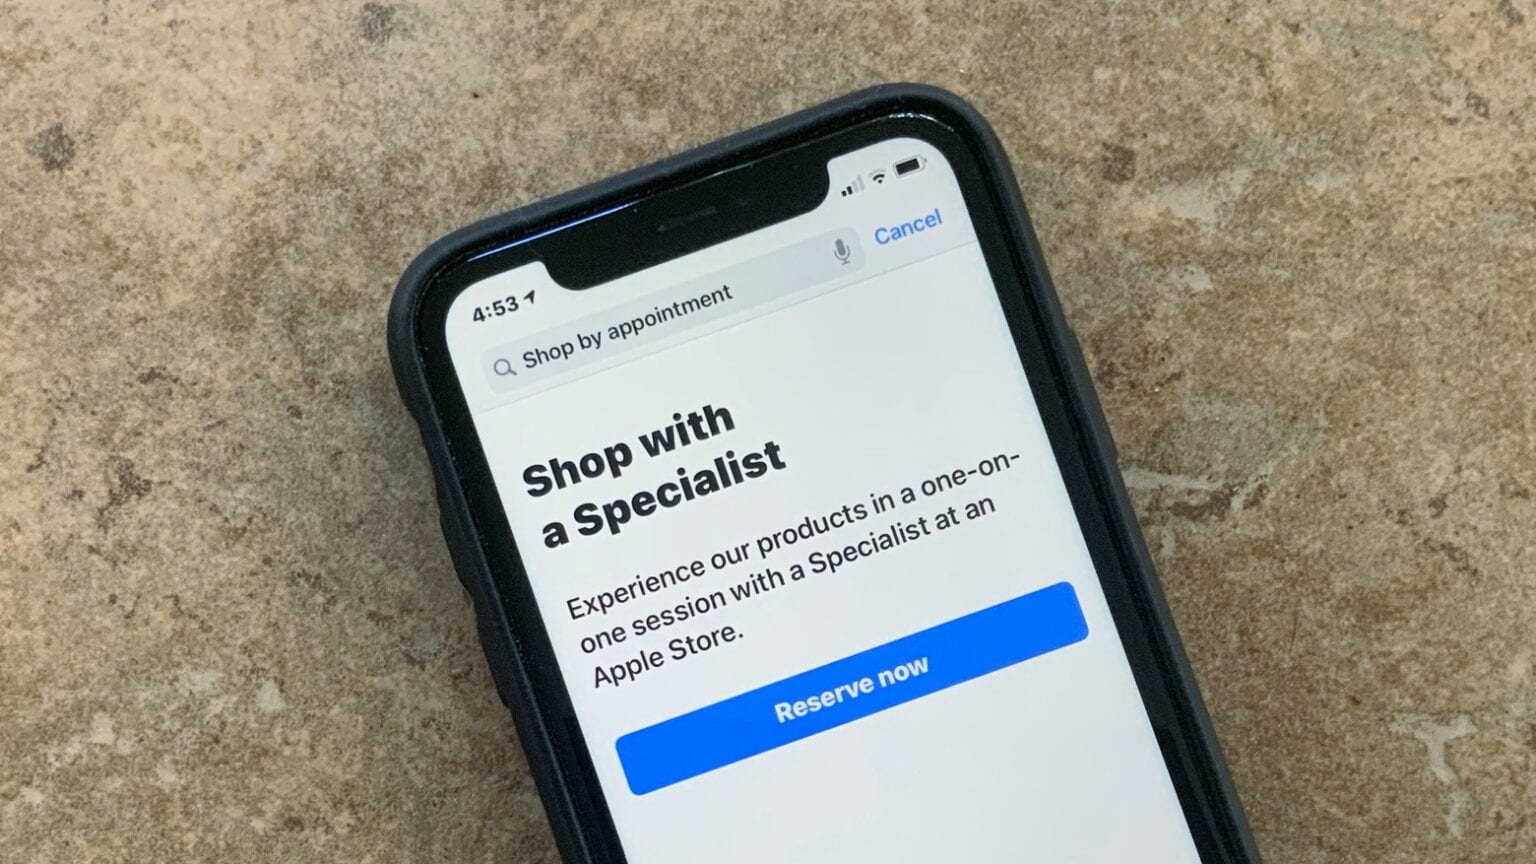 TO deal with COVID-19, Apple Store offer ‘Shop with a Specialist’ service.